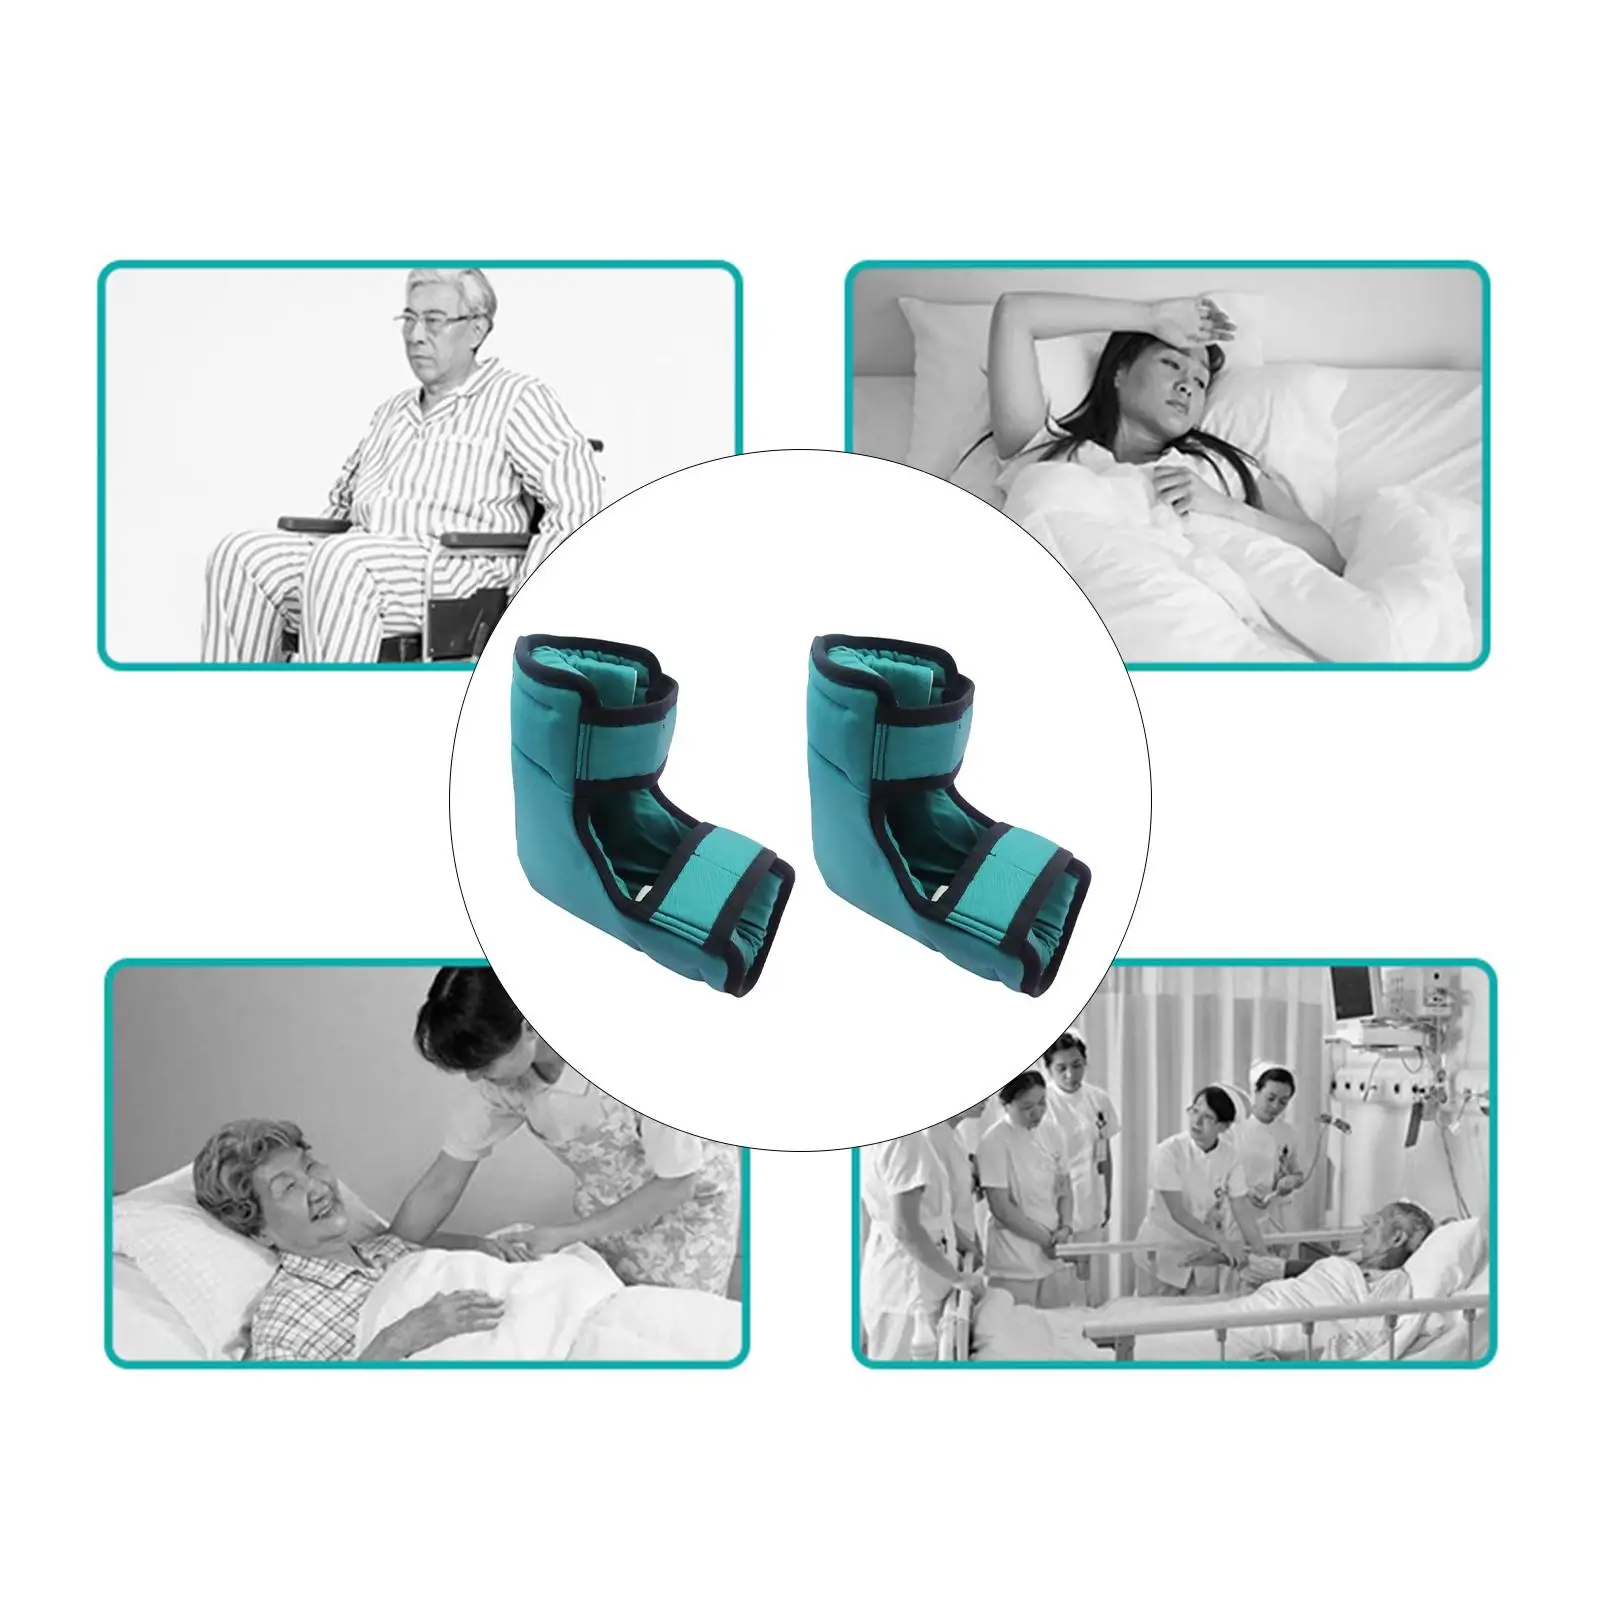   Cushion, 1 Pair  Pressure Sores, , Injuries,   Standard Size or Bariatric Patients